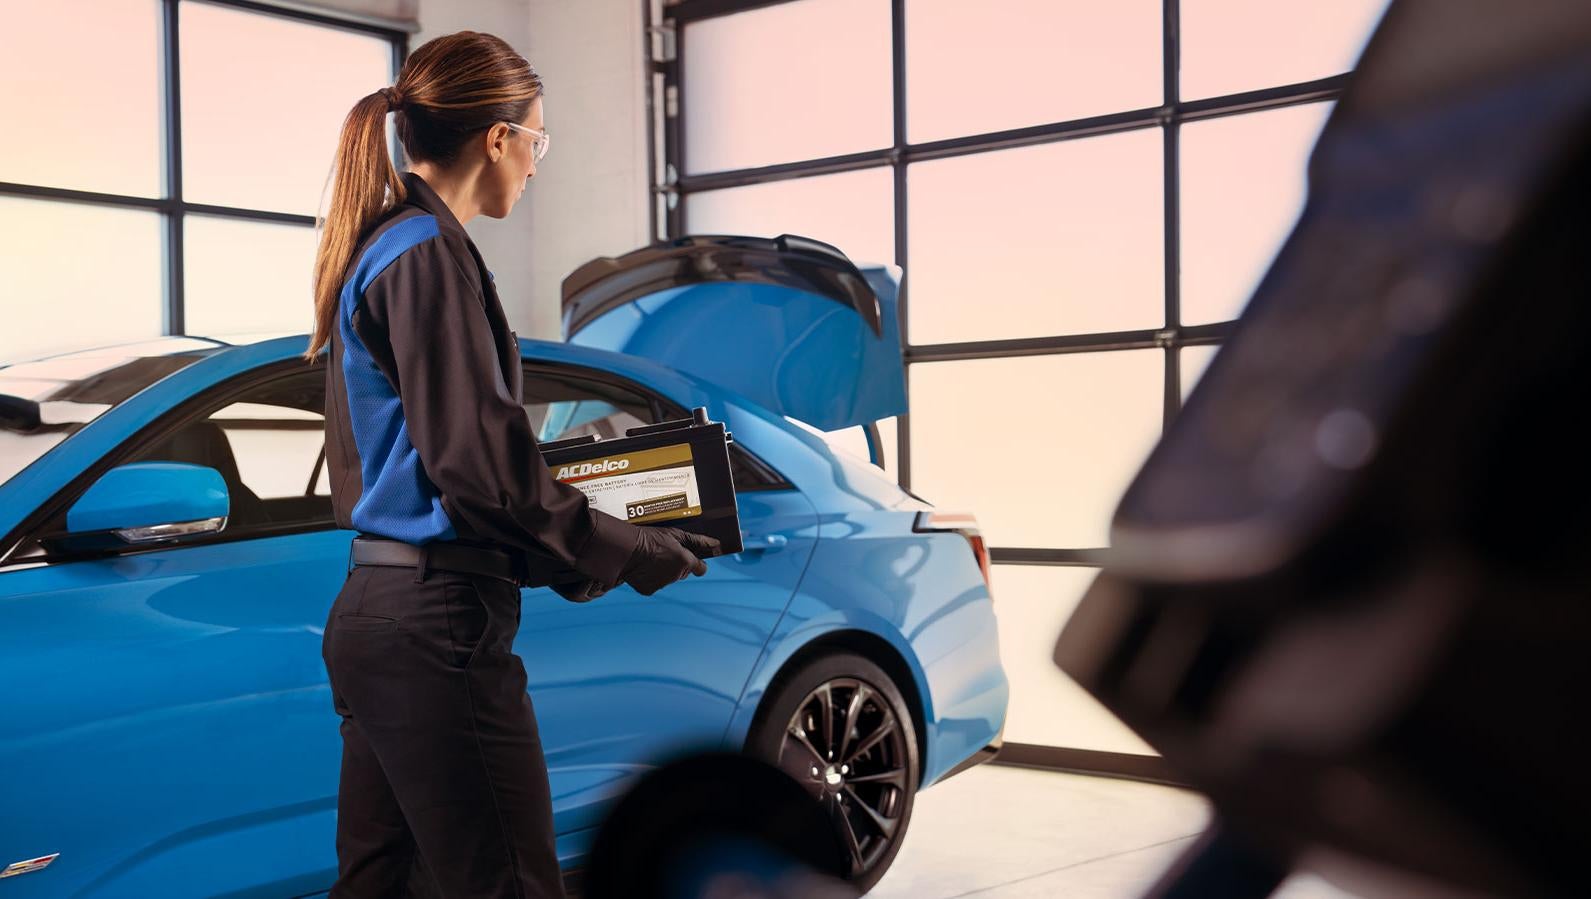 image of a woman carrying a car battery